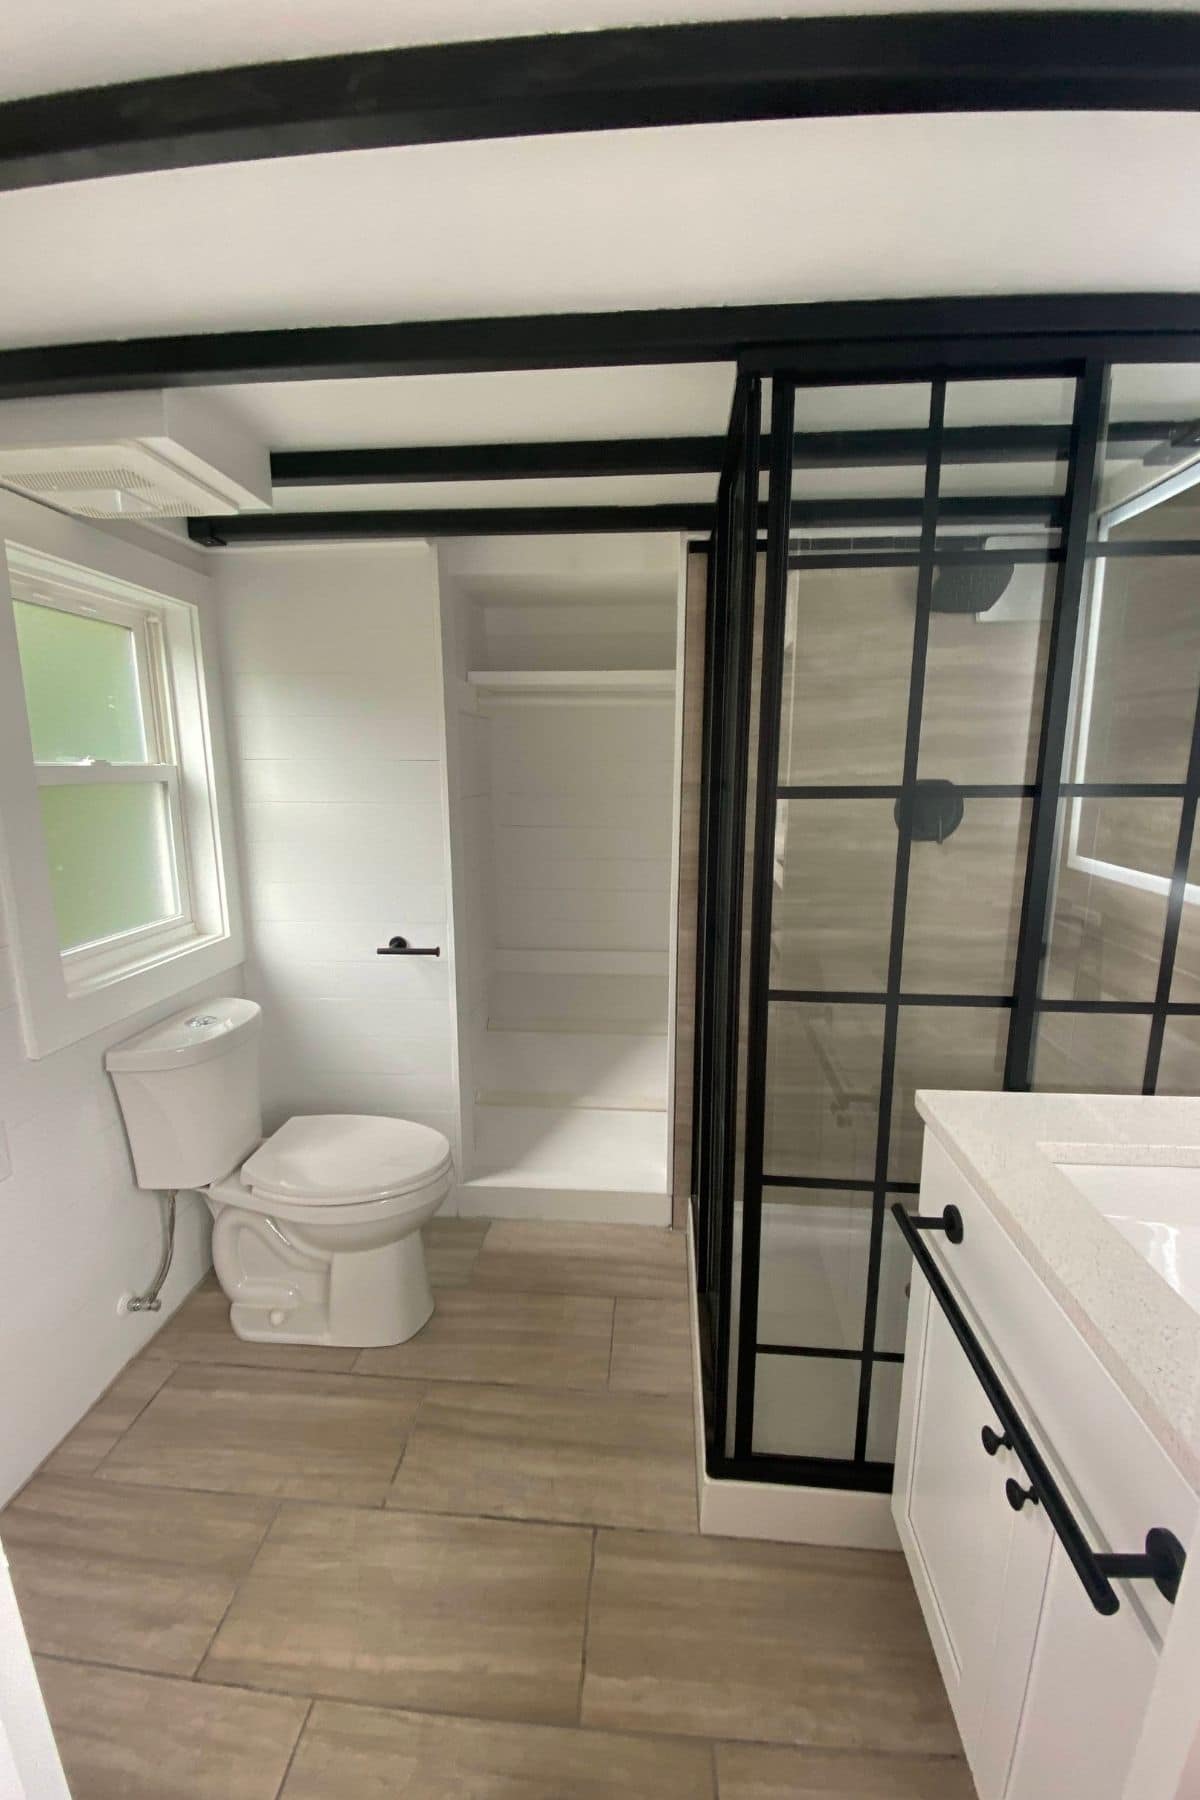 view into bathroom with white vanity in foreground and black and glass shower in background